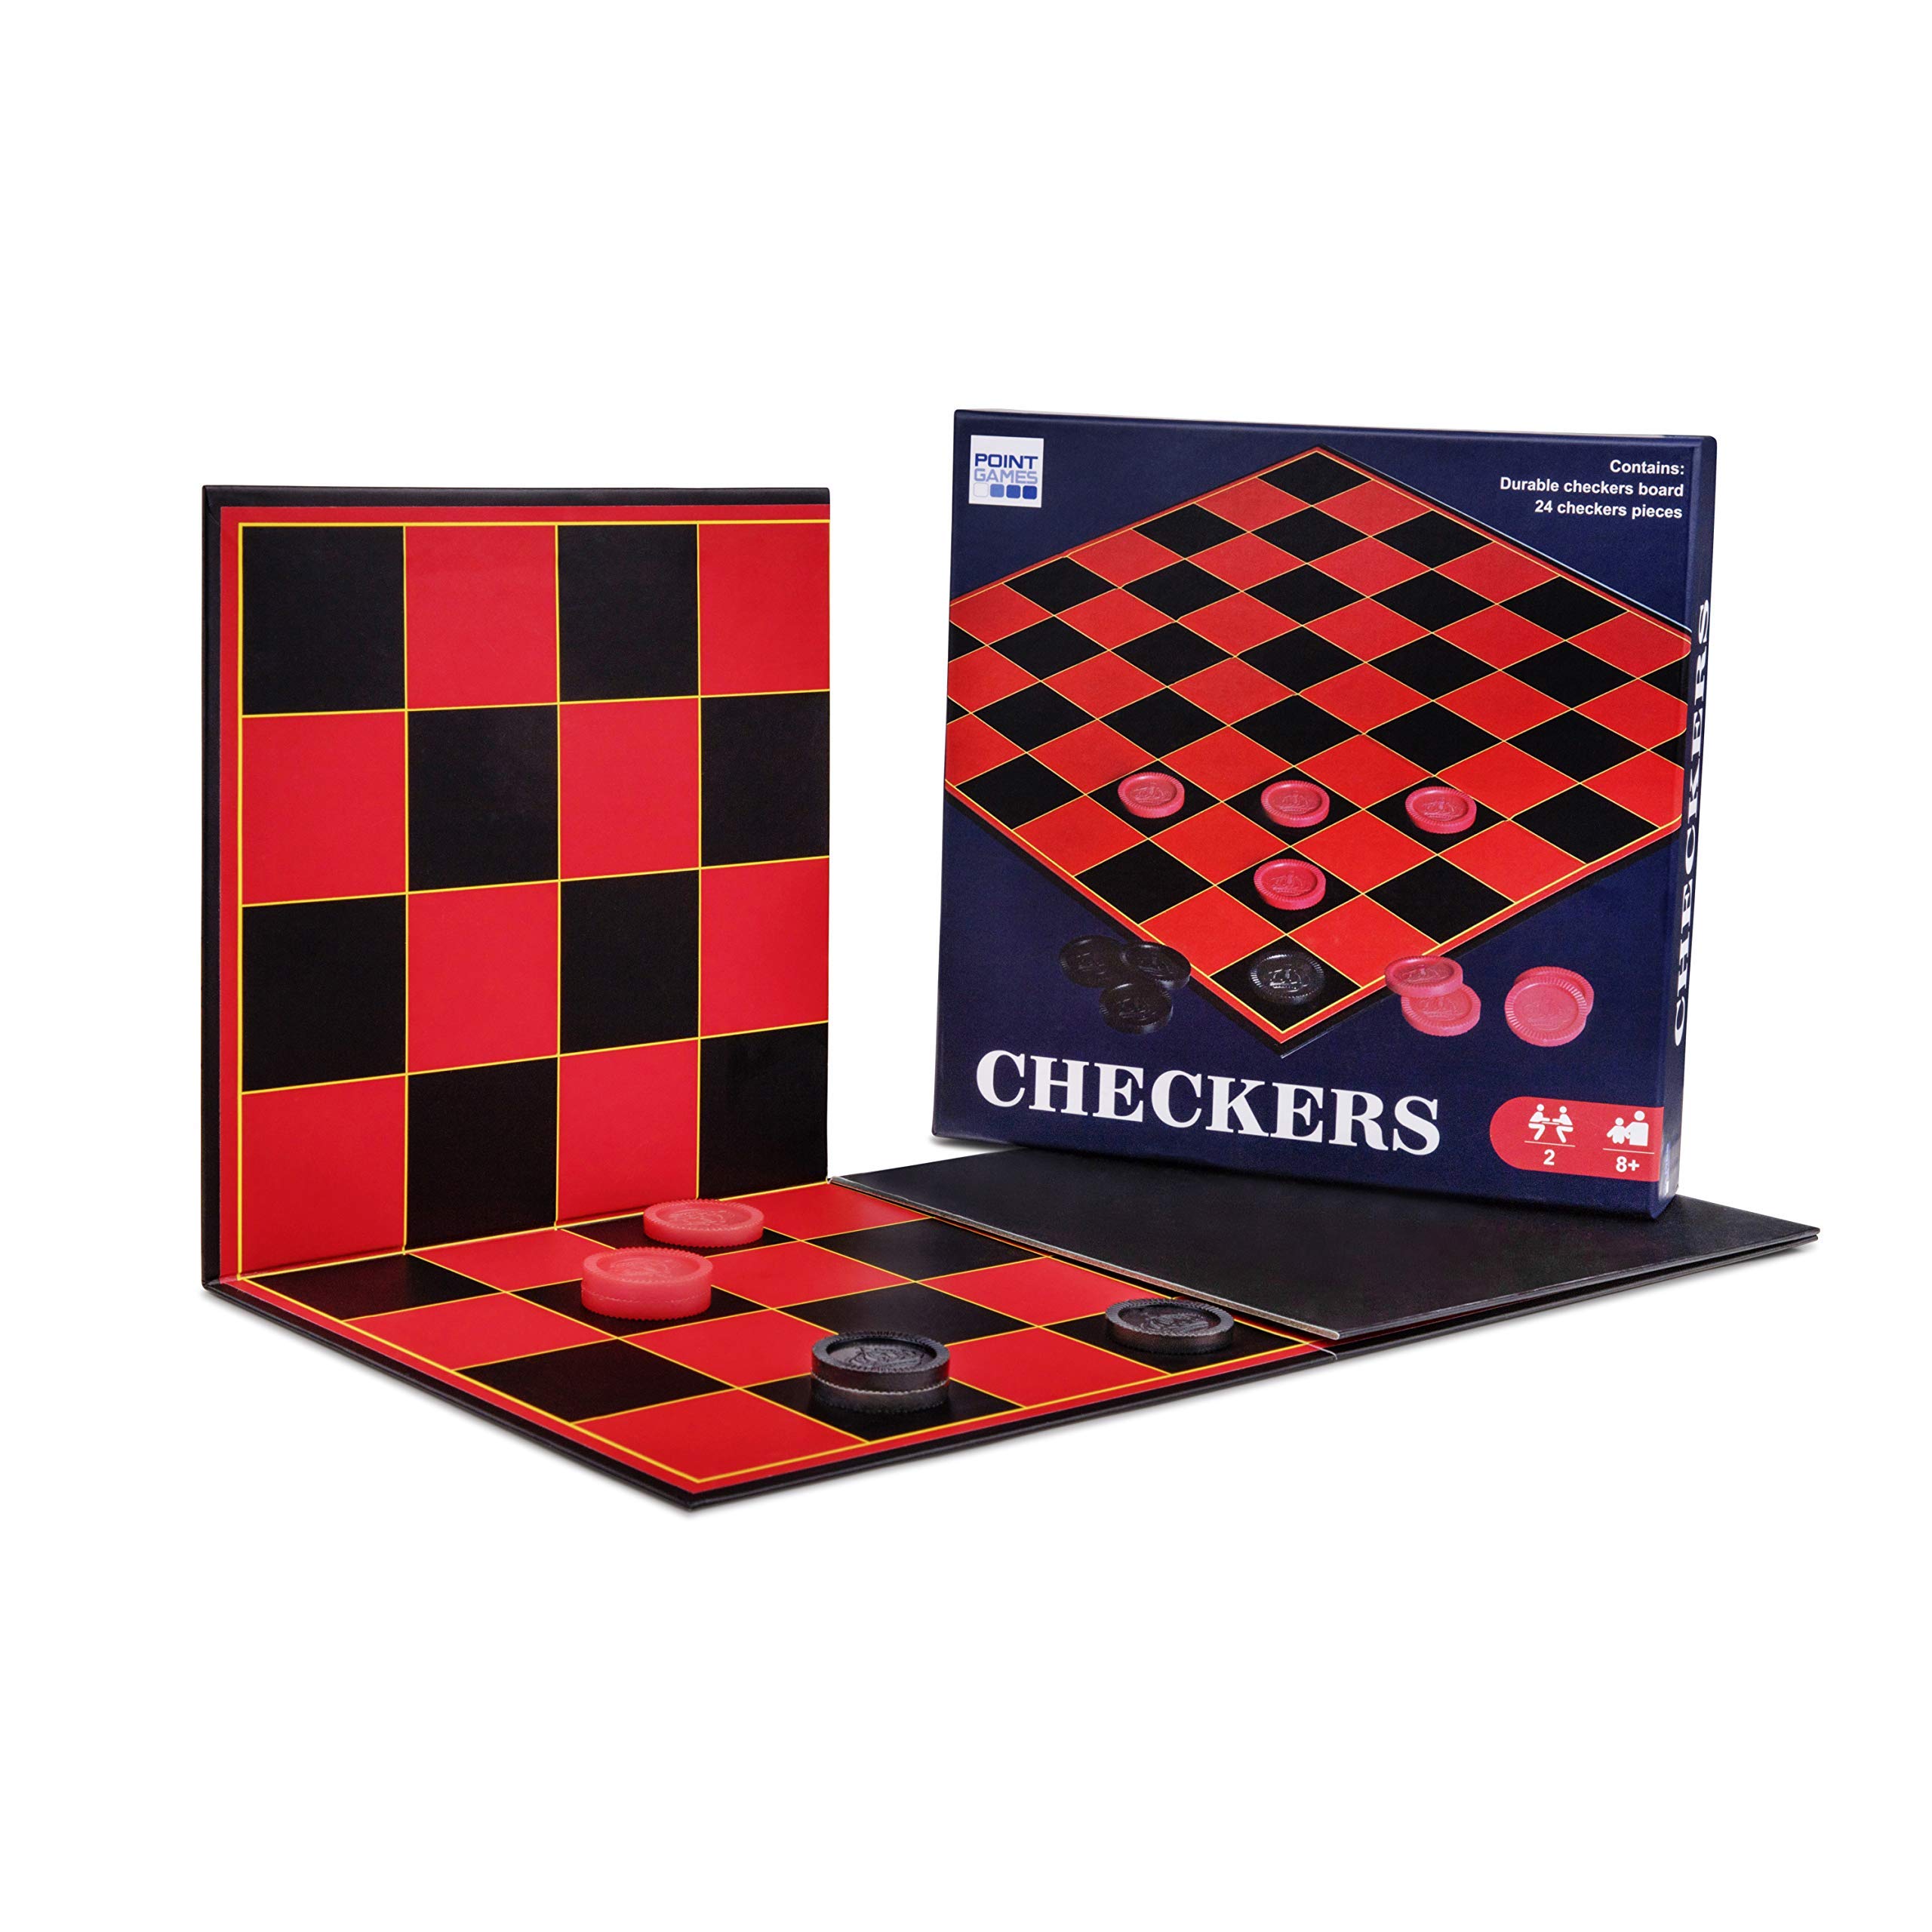 Checkers Board for Kids– Fun Checkerboard Game for Boys and Girls - Interlocking Checkers with Foldable Board by Point Games